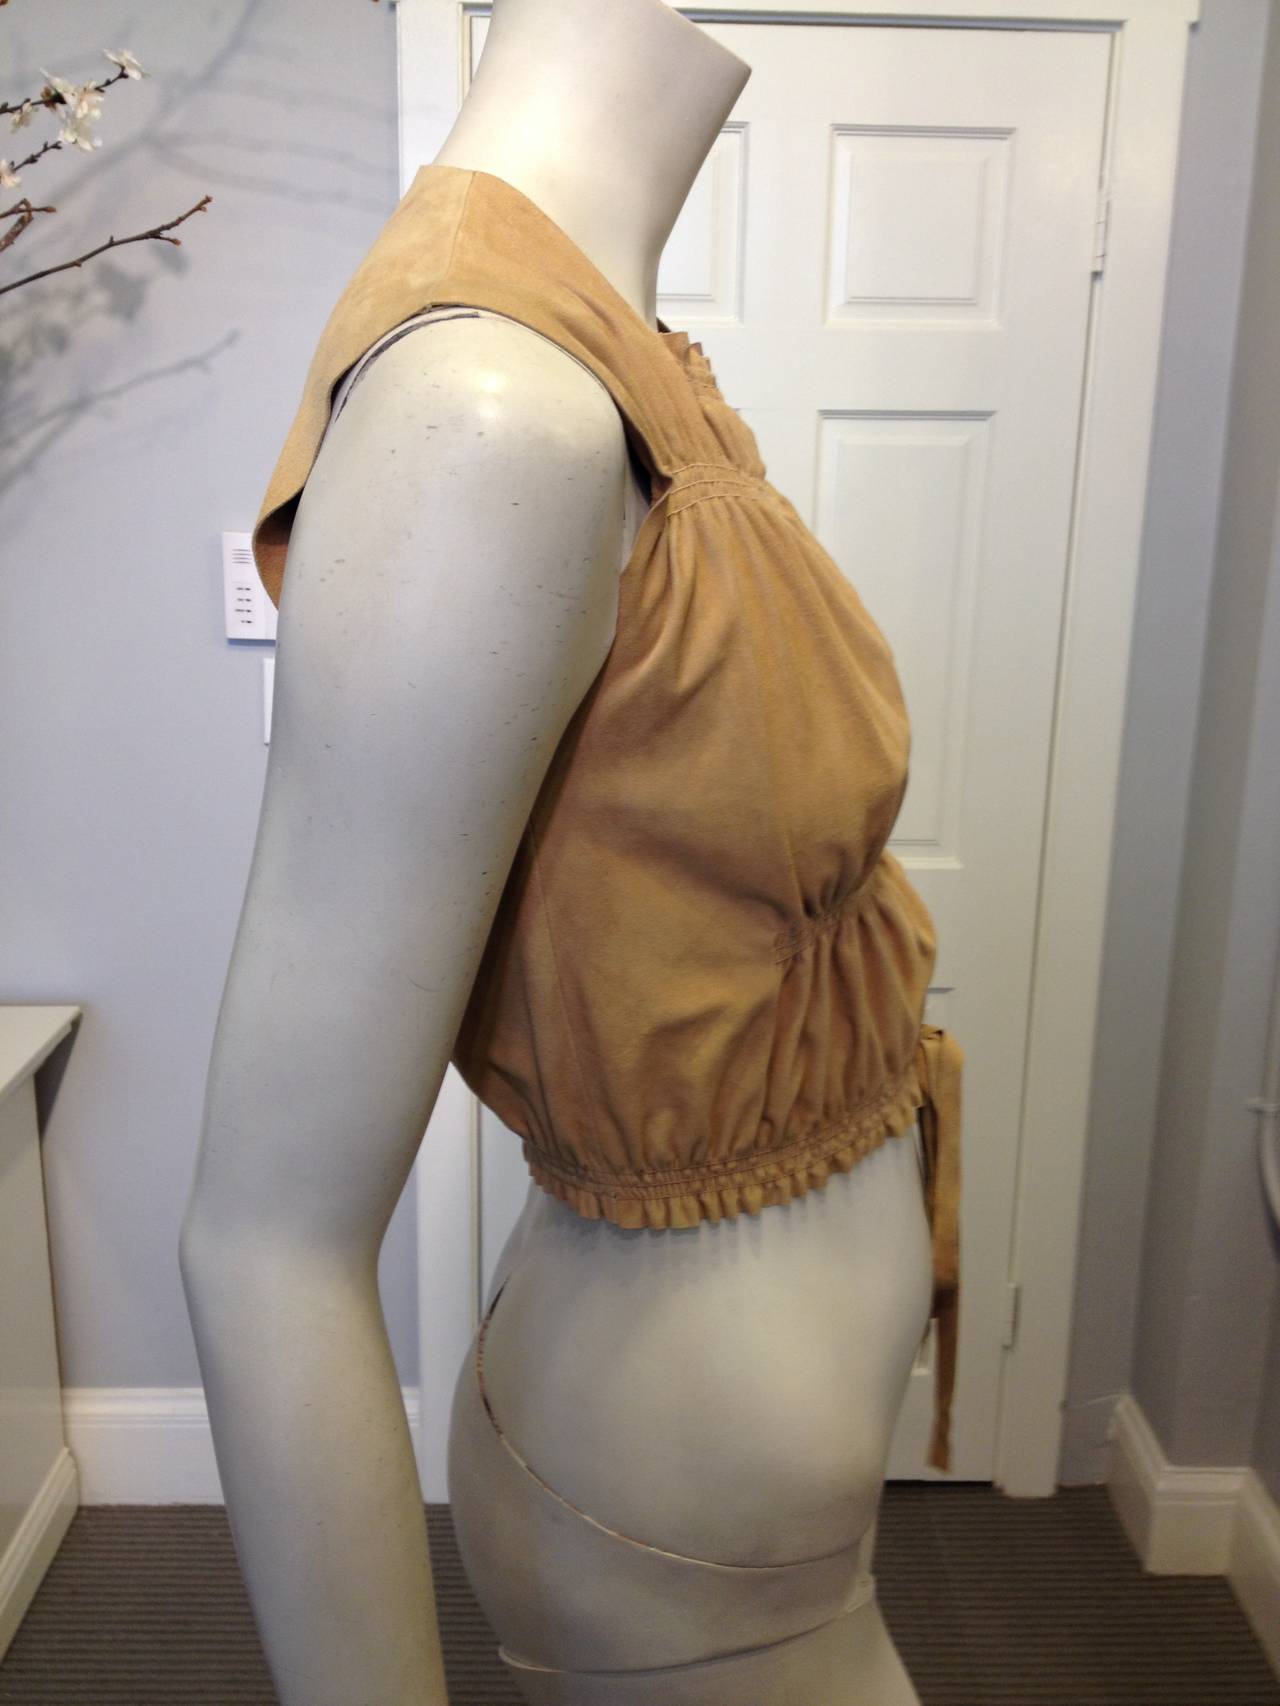 Ultra soft suede makes this Jean Paul Gaultier top something truly special. With a high neckline, sleeveless cut, and cropped hemline, it's perfect for anything from a festival or summer road trip to an afternoon in the park with your friends.